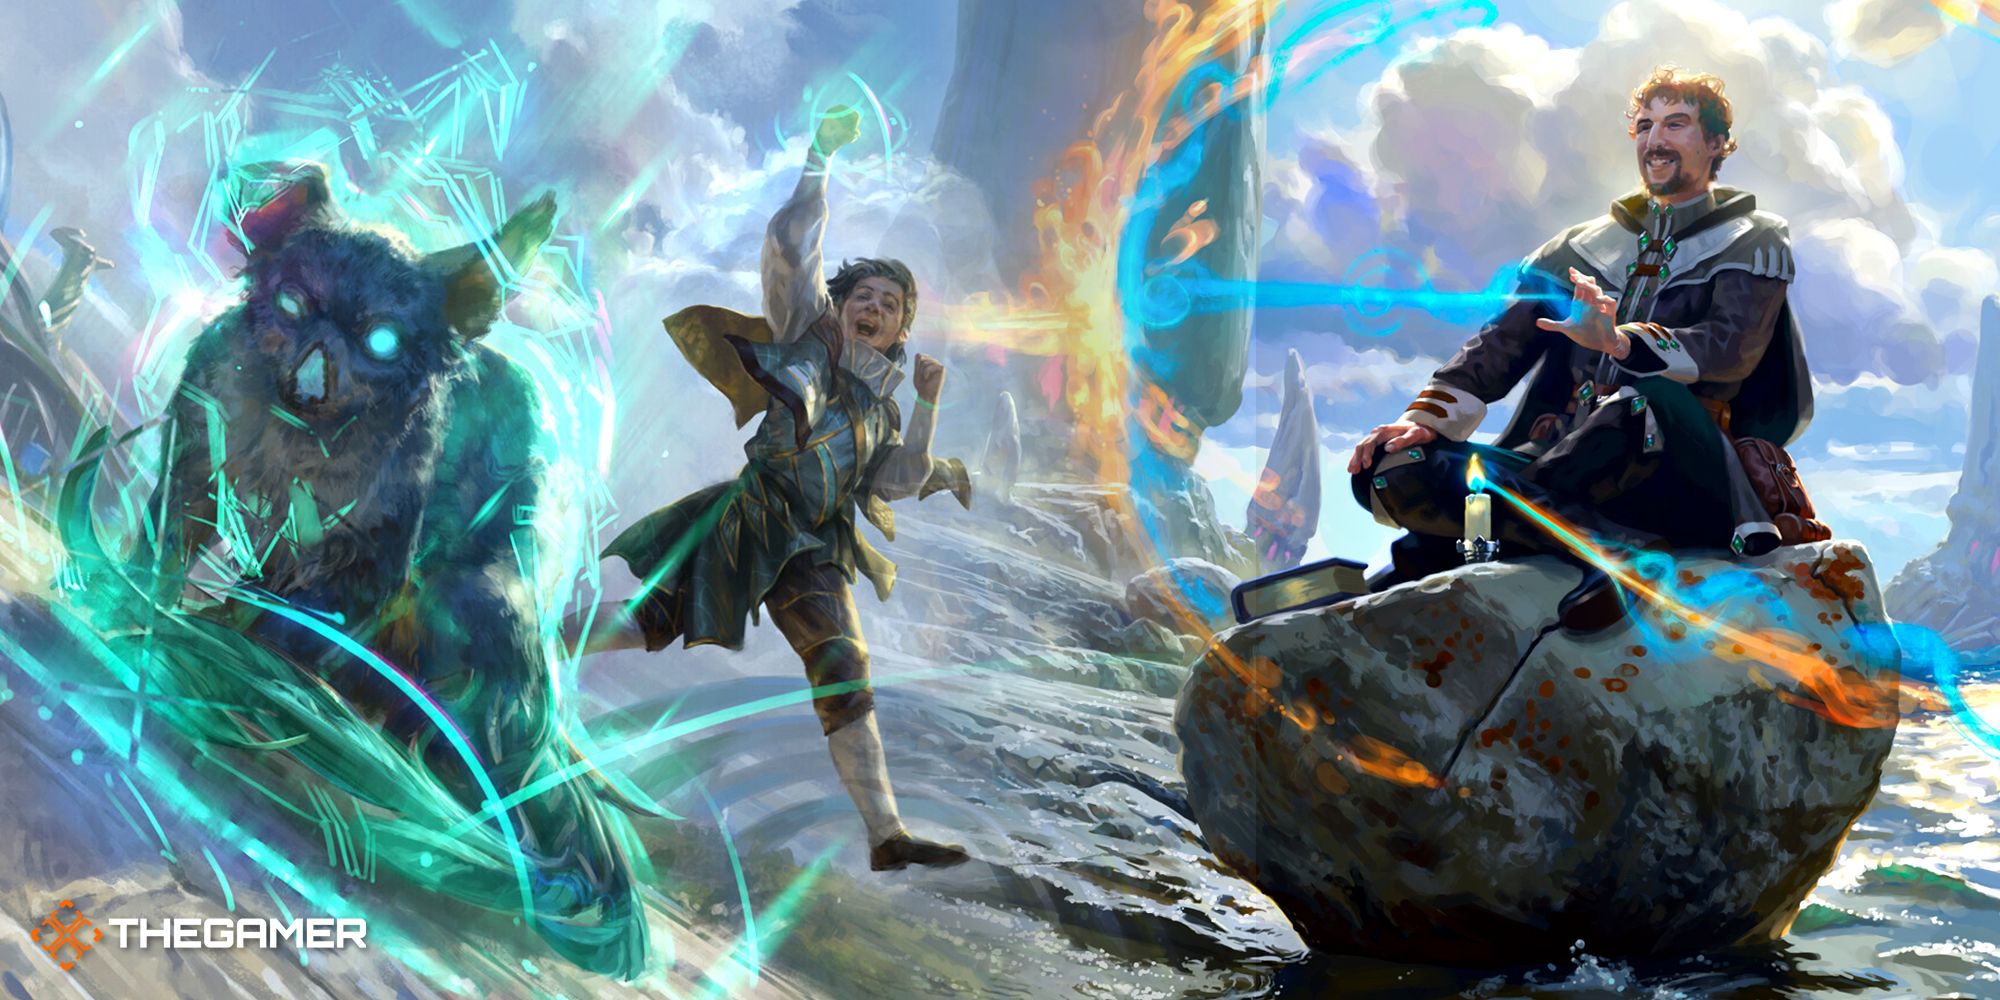 19-Dungeons & Dragons All Official Wizard Subclasses, Ranked